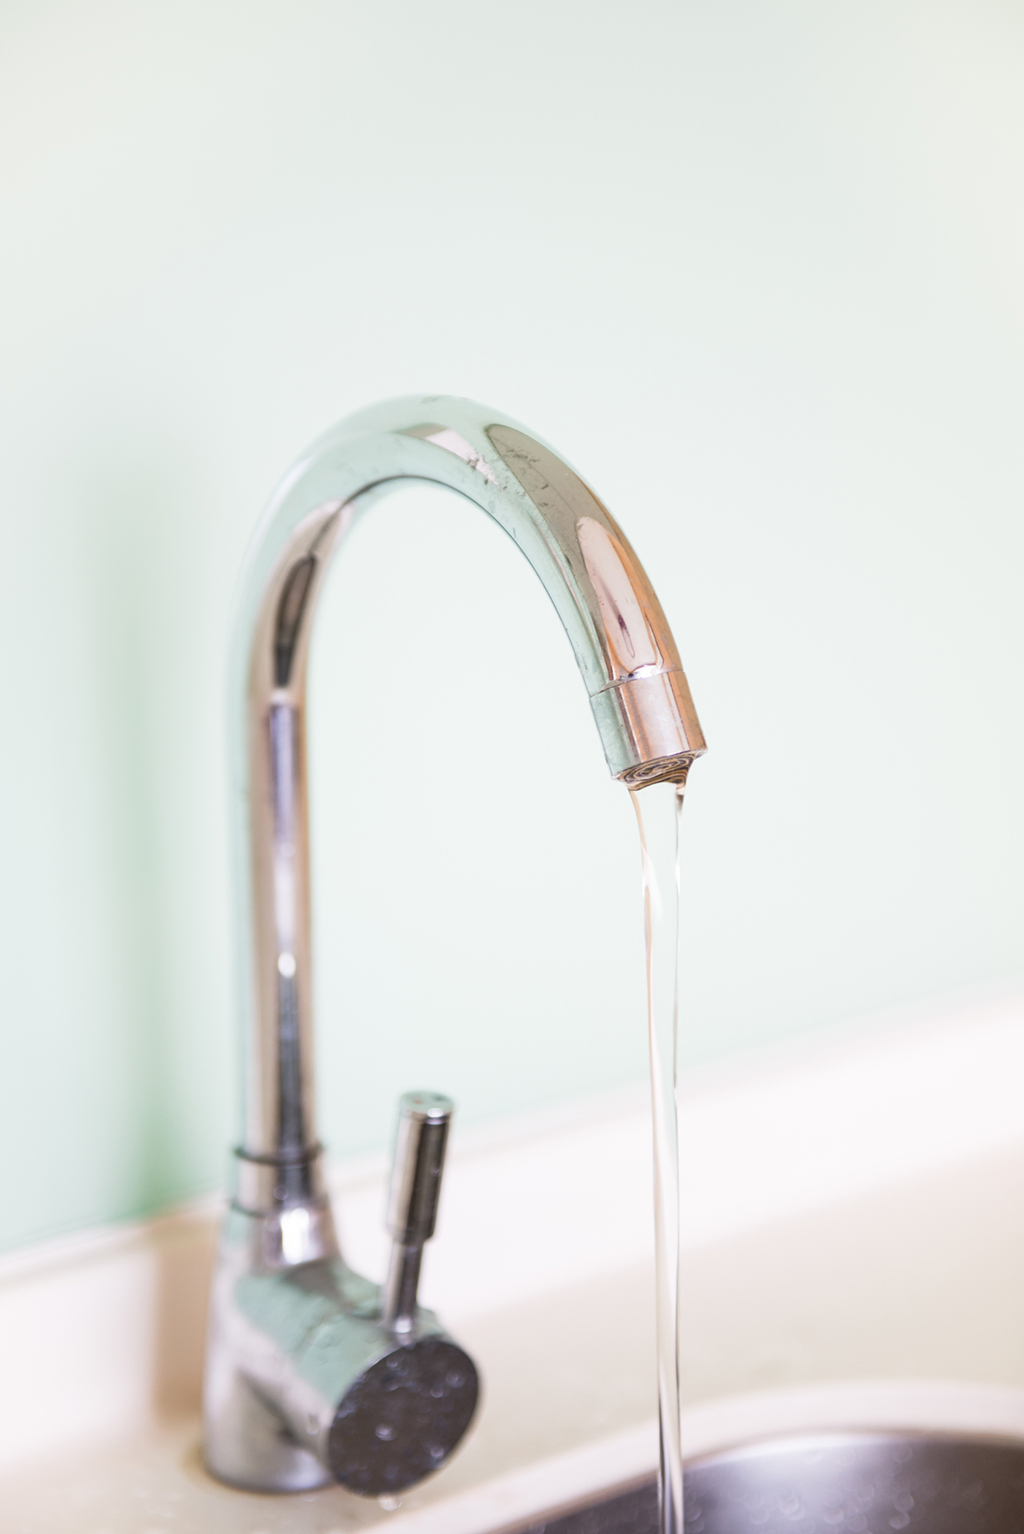 What Do You Do If Your Water Pressure Is Low?